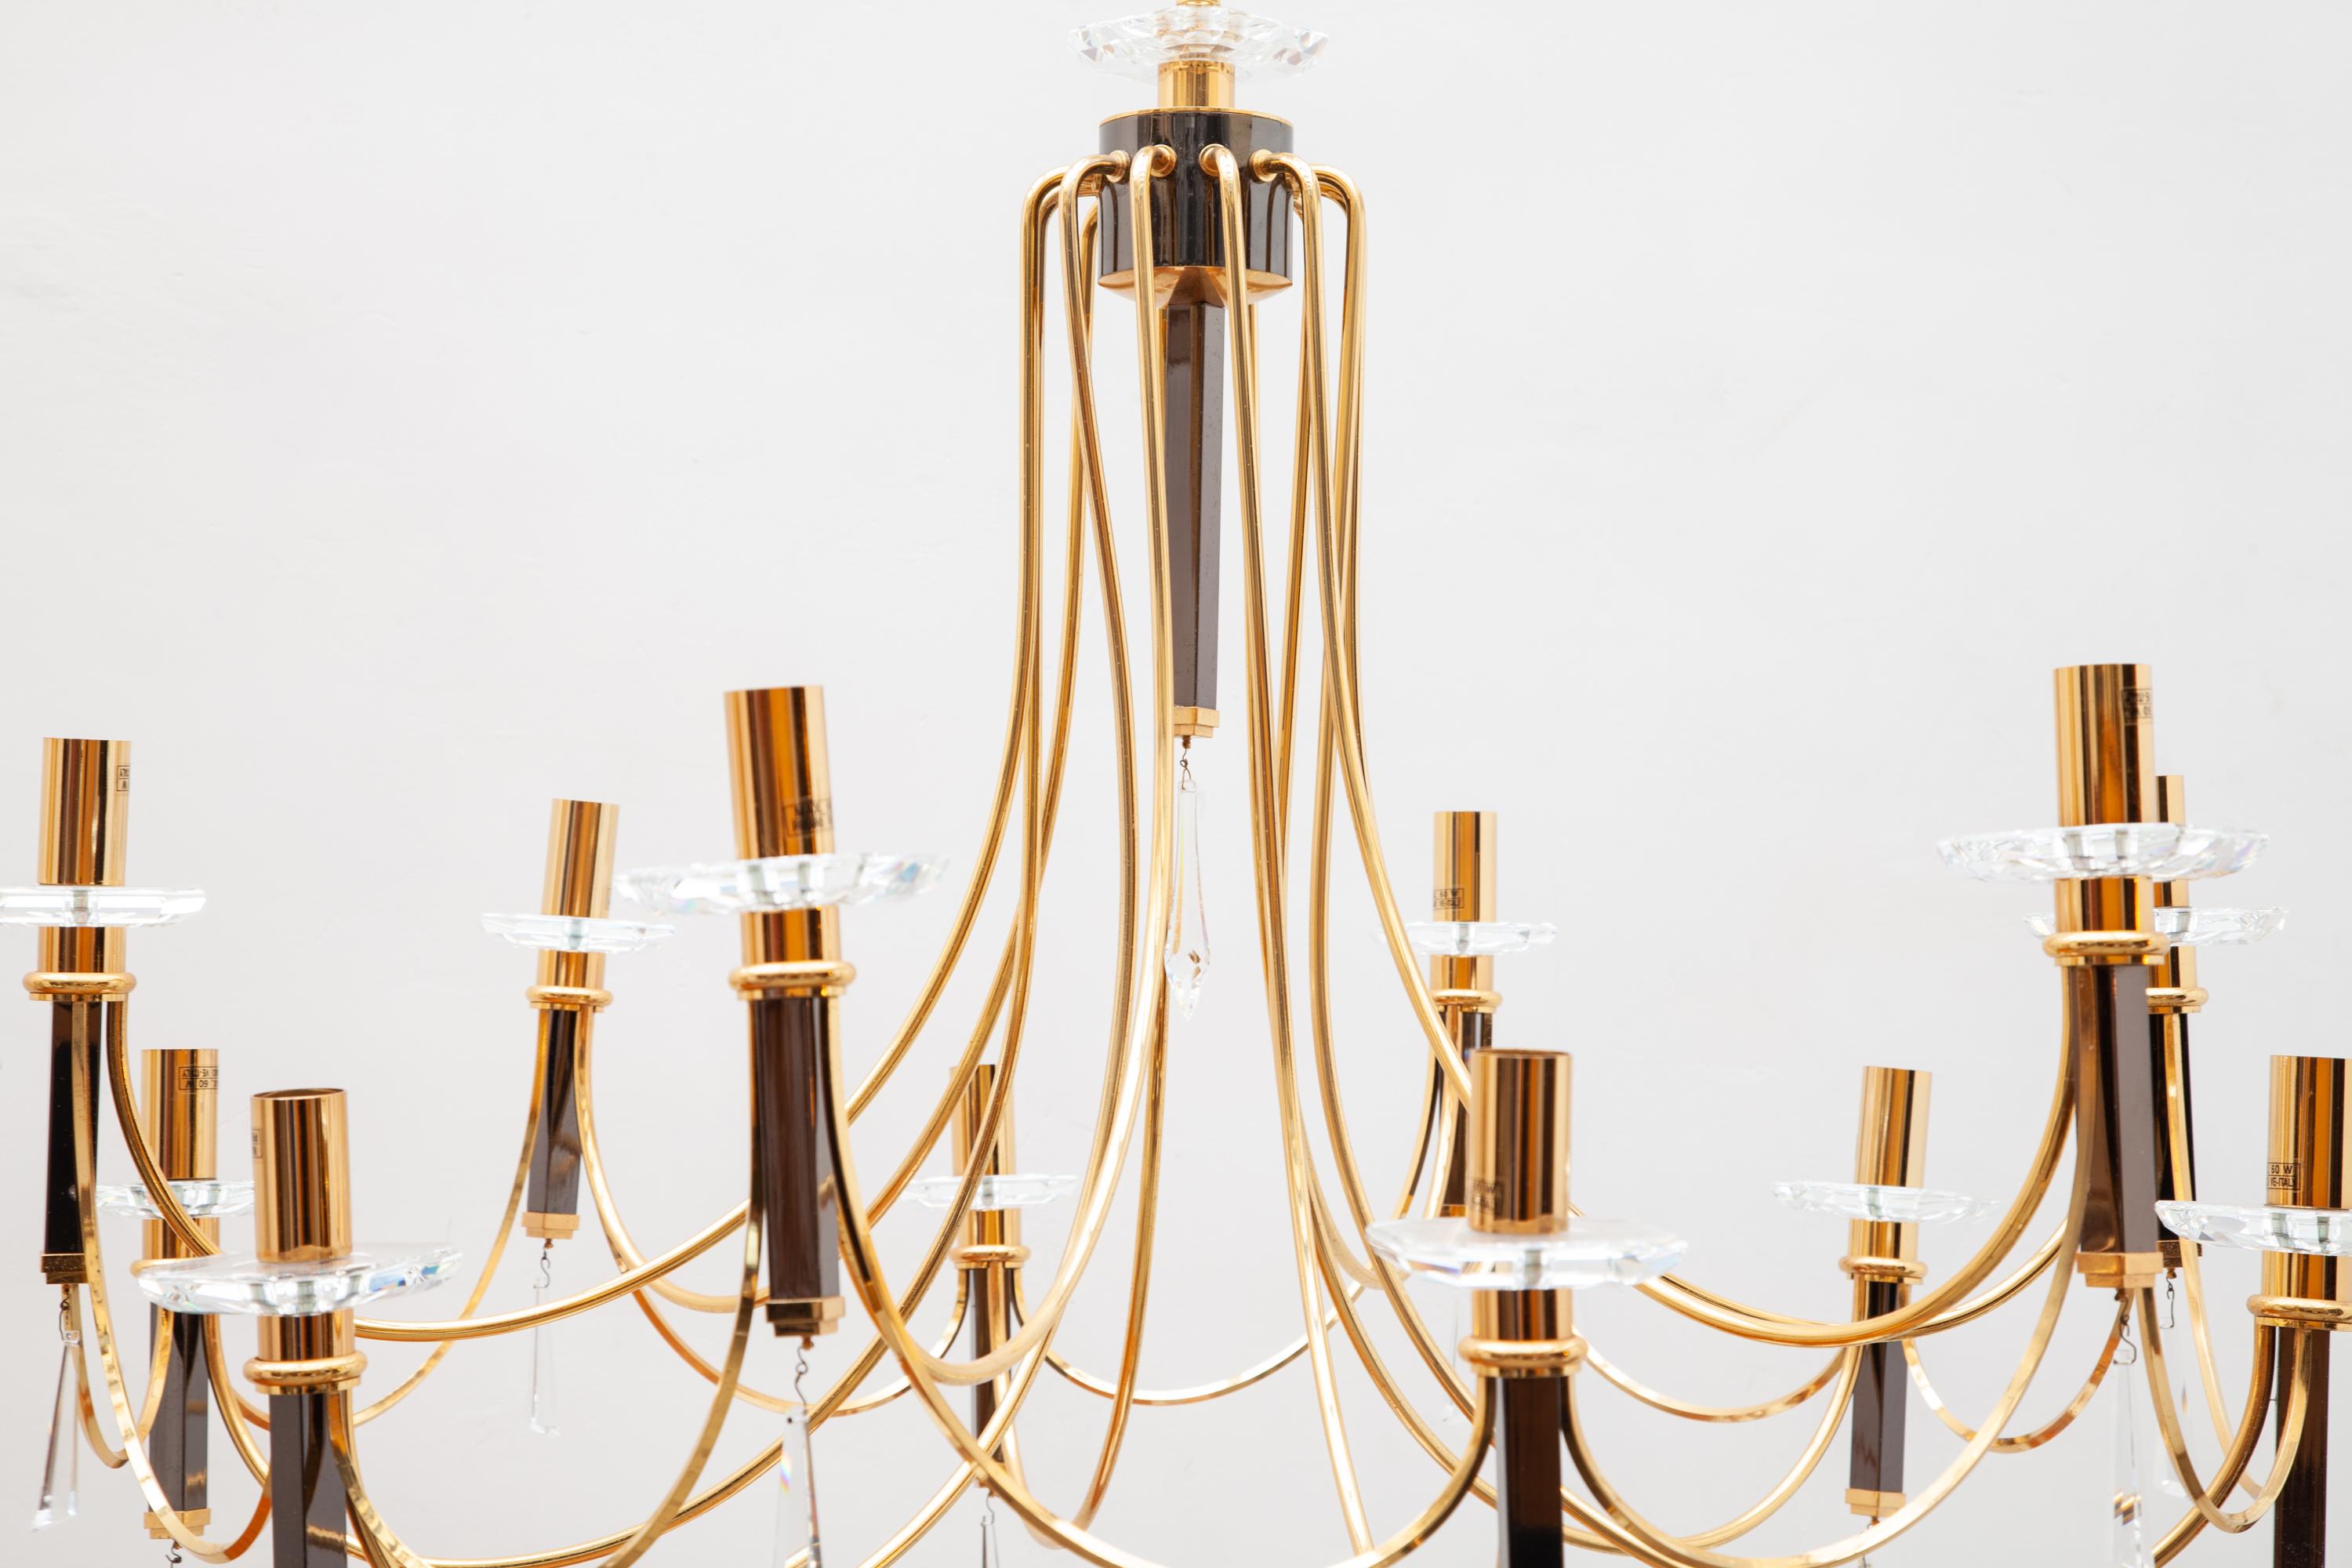 Chandelier by Italian manufacturer Prearo a creation of a fine piece of art of a classical model features stylish faceted crystal glass accents and 12 light bulbs with base E14.
Materials - brass-plated steel, glass crystals.